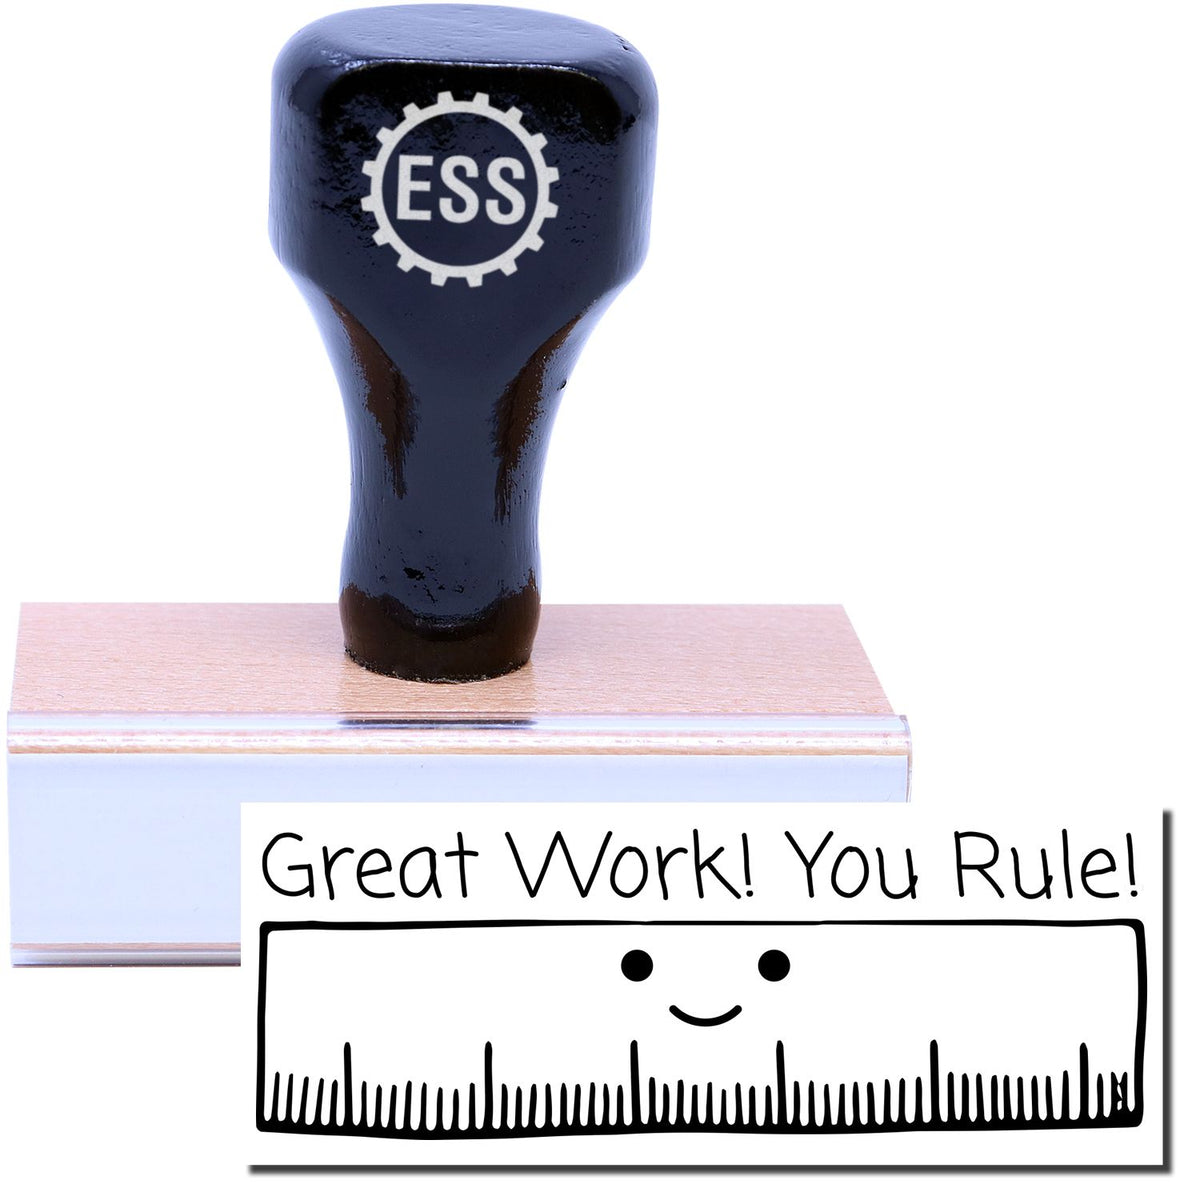 A stock office rubber stamp with a stamped image showing how the text &quot;Great Work! You Rule!&quot; with an image of a ruler with a smiling face is displayed after stamping.